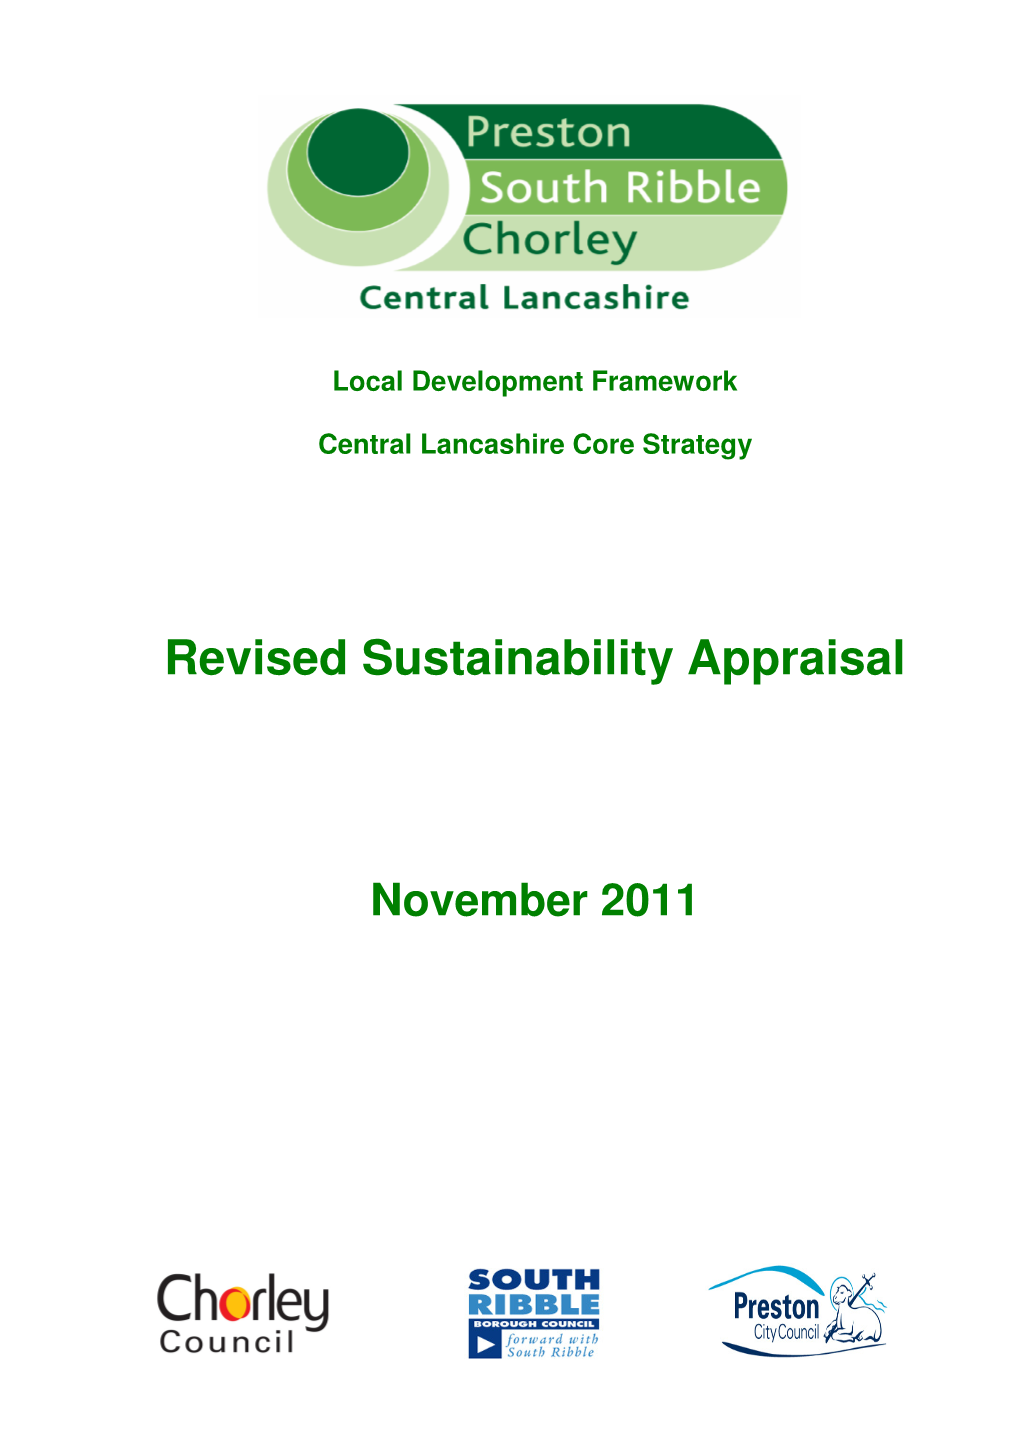 Revised Sustainability Appraisal